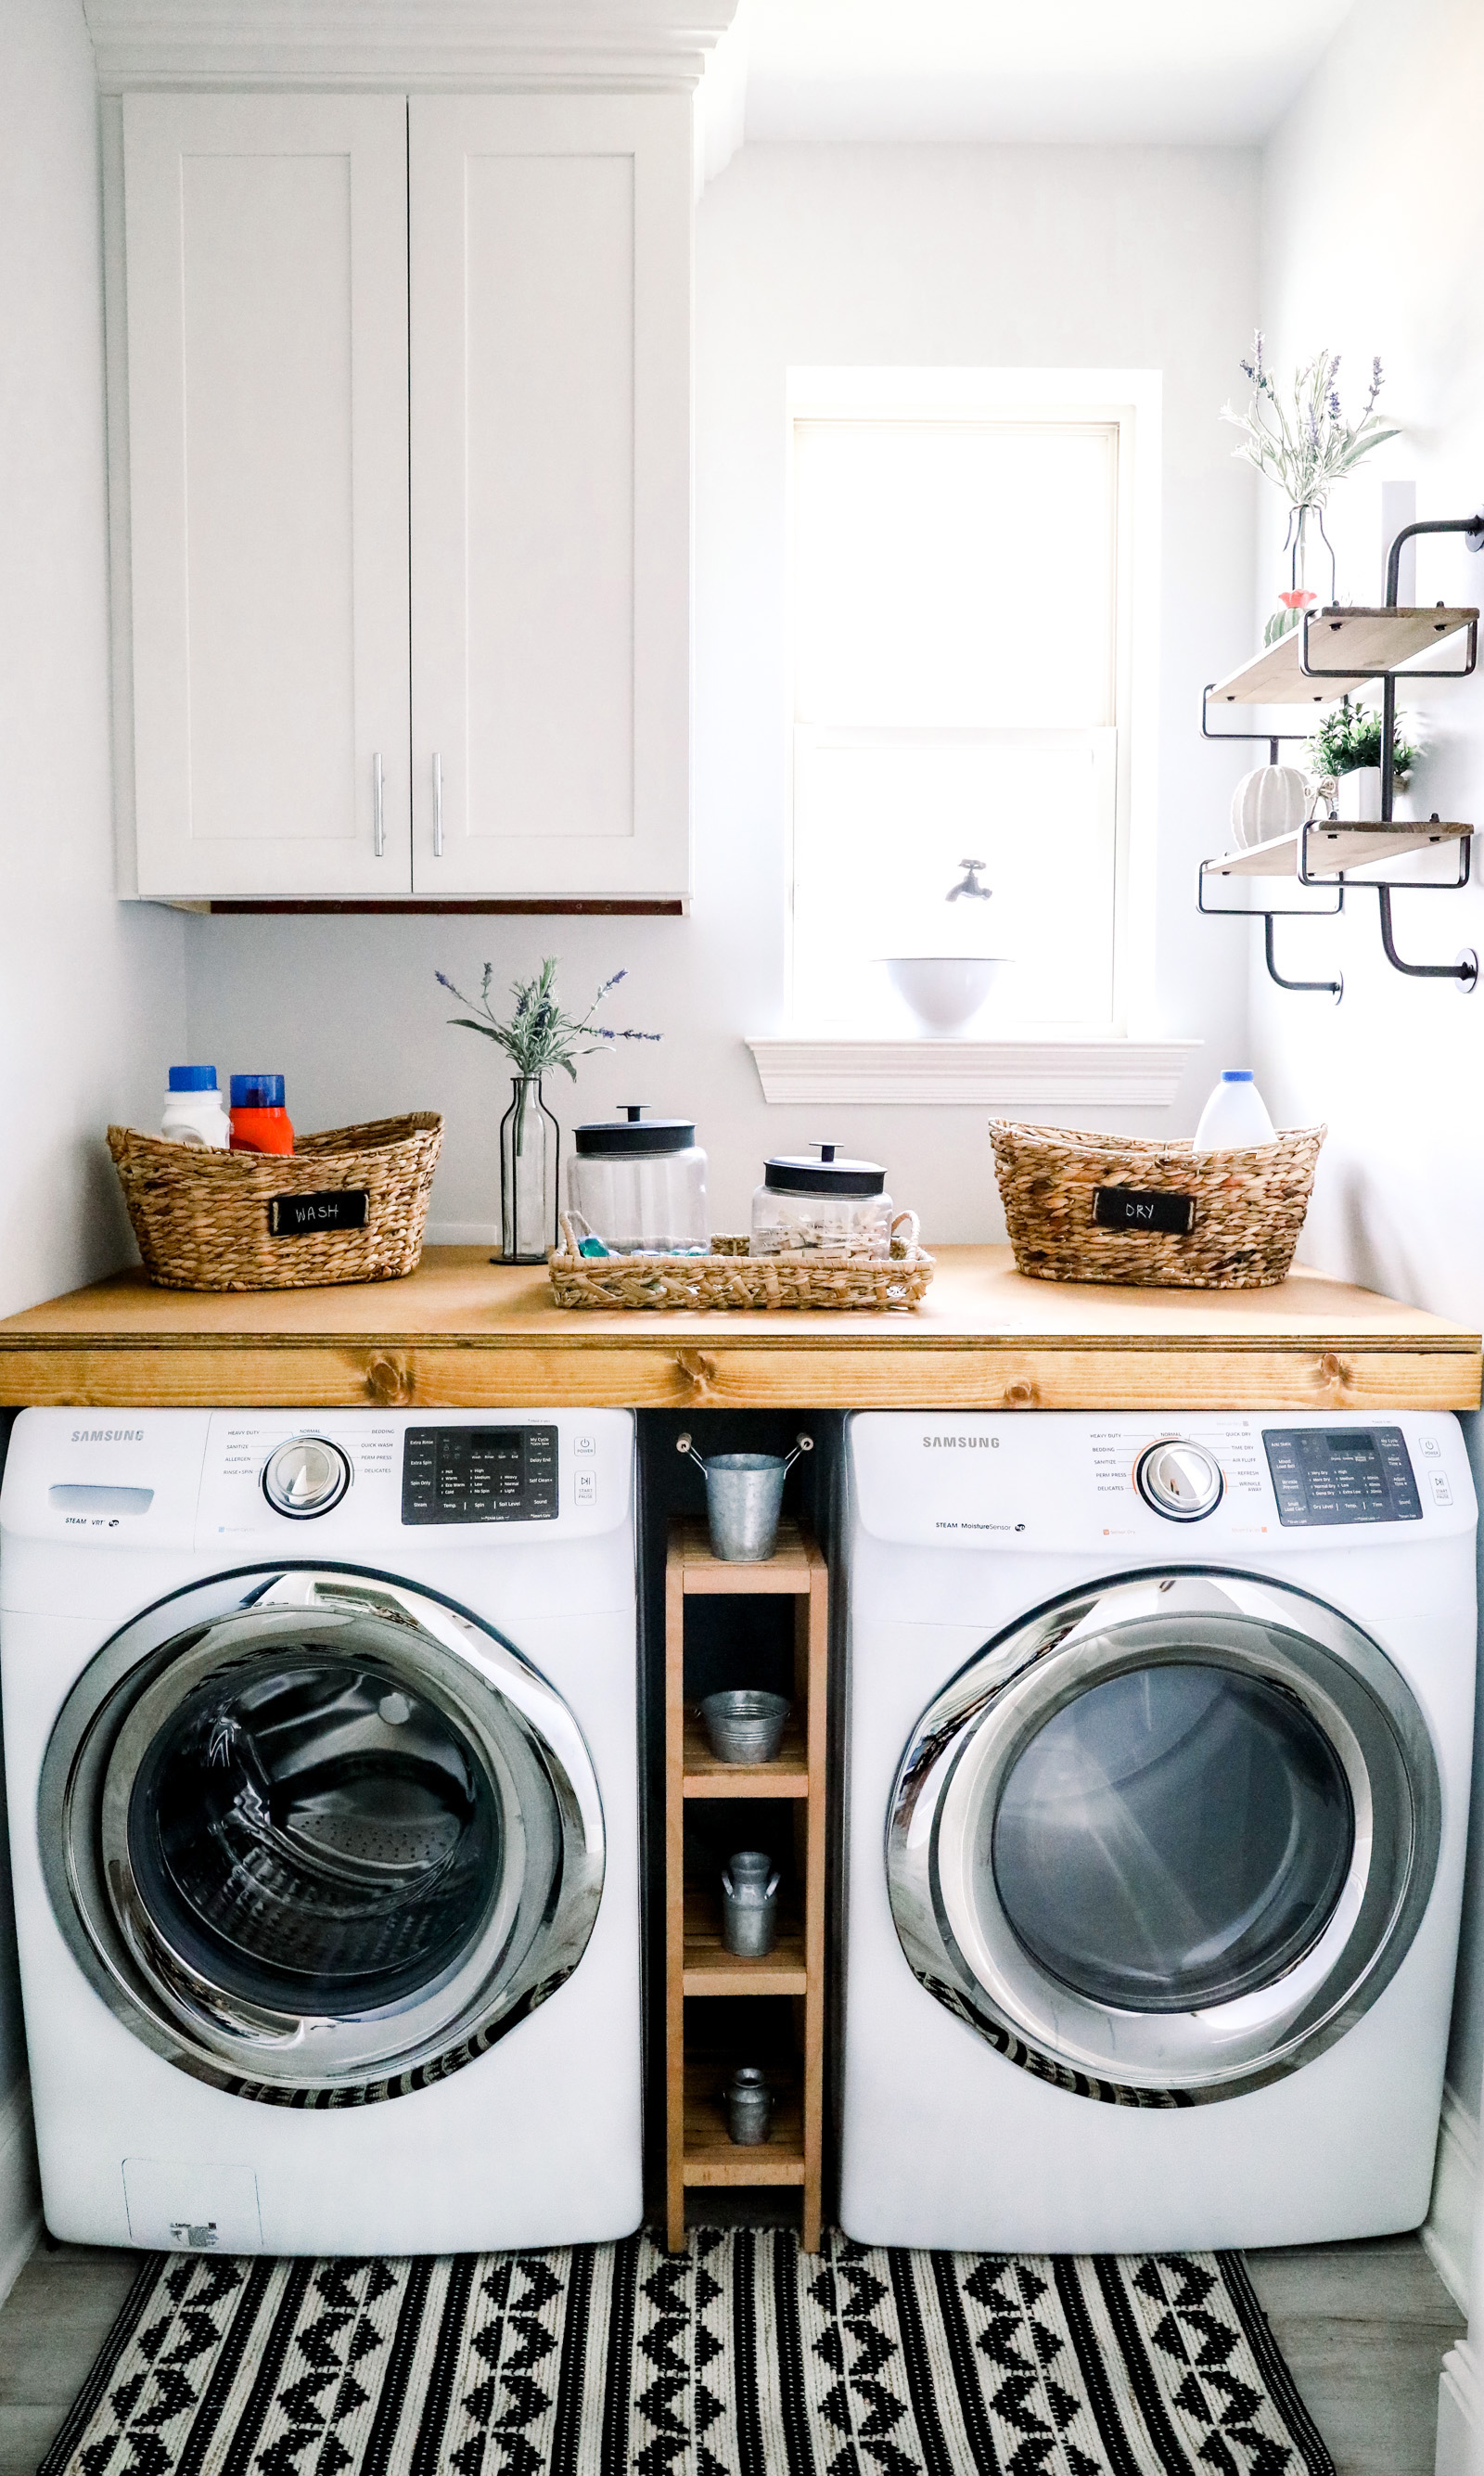 DIY Laundry Room Countertop Over Washer Dryer  Laundry room countertop,  Laundry room diy, Diy laundry